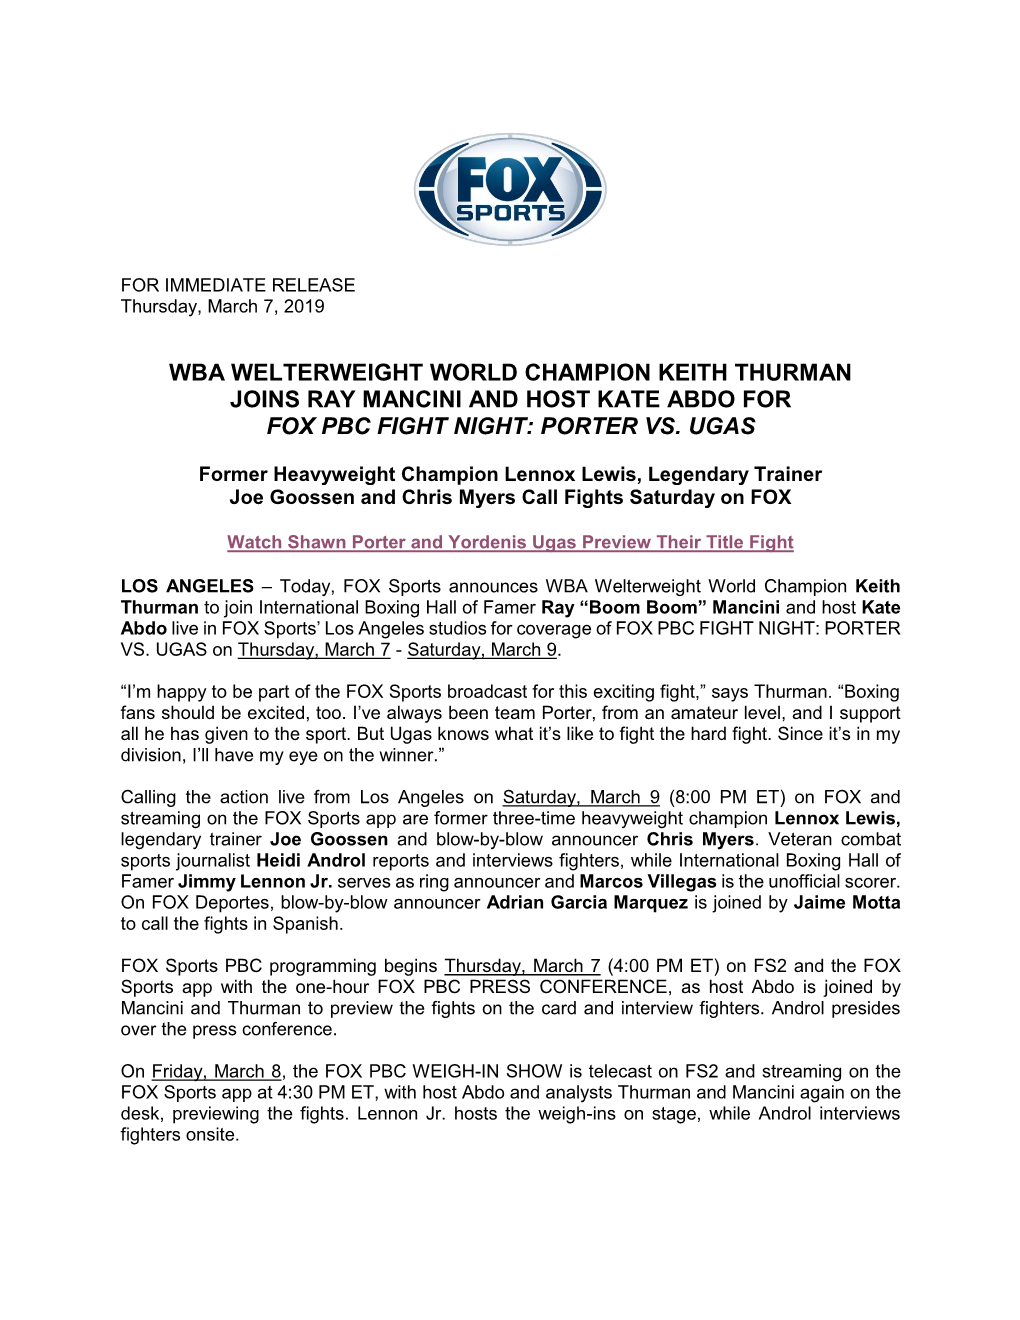 Wba Welterweight World Champion Keith Thurman Joins Ray Mancini and Host Kate Abdo for Fox Pbc Fight Night: Porter Vs